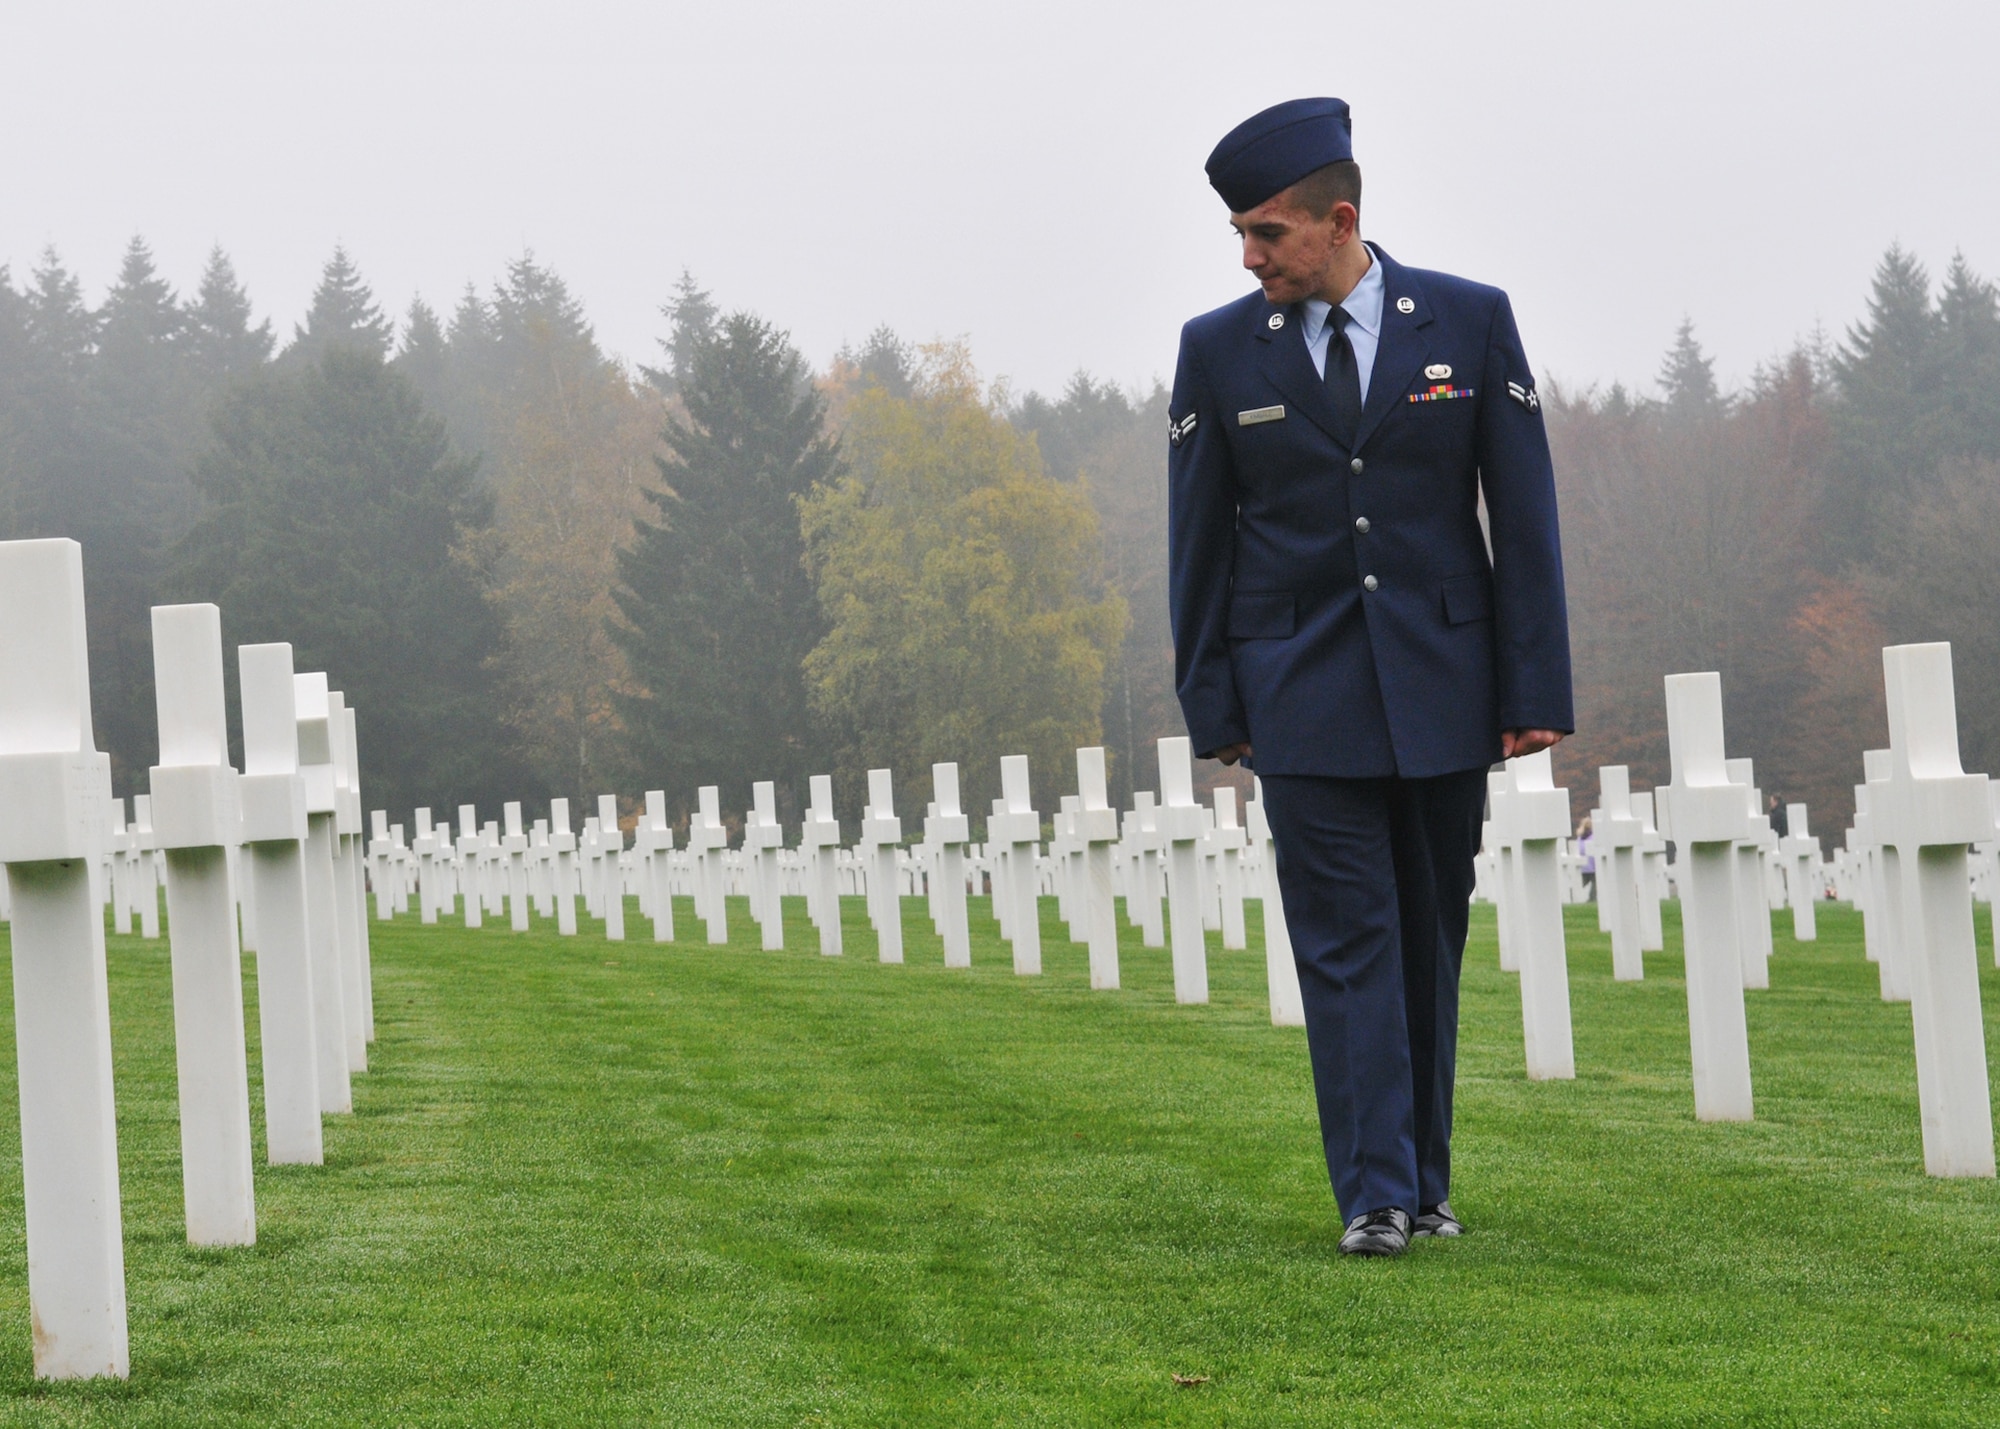 SPANGDAHLEM AIR BASE, Germany -- Airman 1st Class Michael D. Kimball, 52nd Operations Support Squadron, looks at graves of fallen World War II soldiers at the Luxembourg-American Cemetery and Memorial in Luxembourg City, Nov. 11. More than 5,000 American servicemembers from World War II now rest at the 50.5 acre cemetery, which is one of 14 American cemeteries established overseas after World War II. (U.S. Air Force photo/Airman 1st Class Nick Wilson)